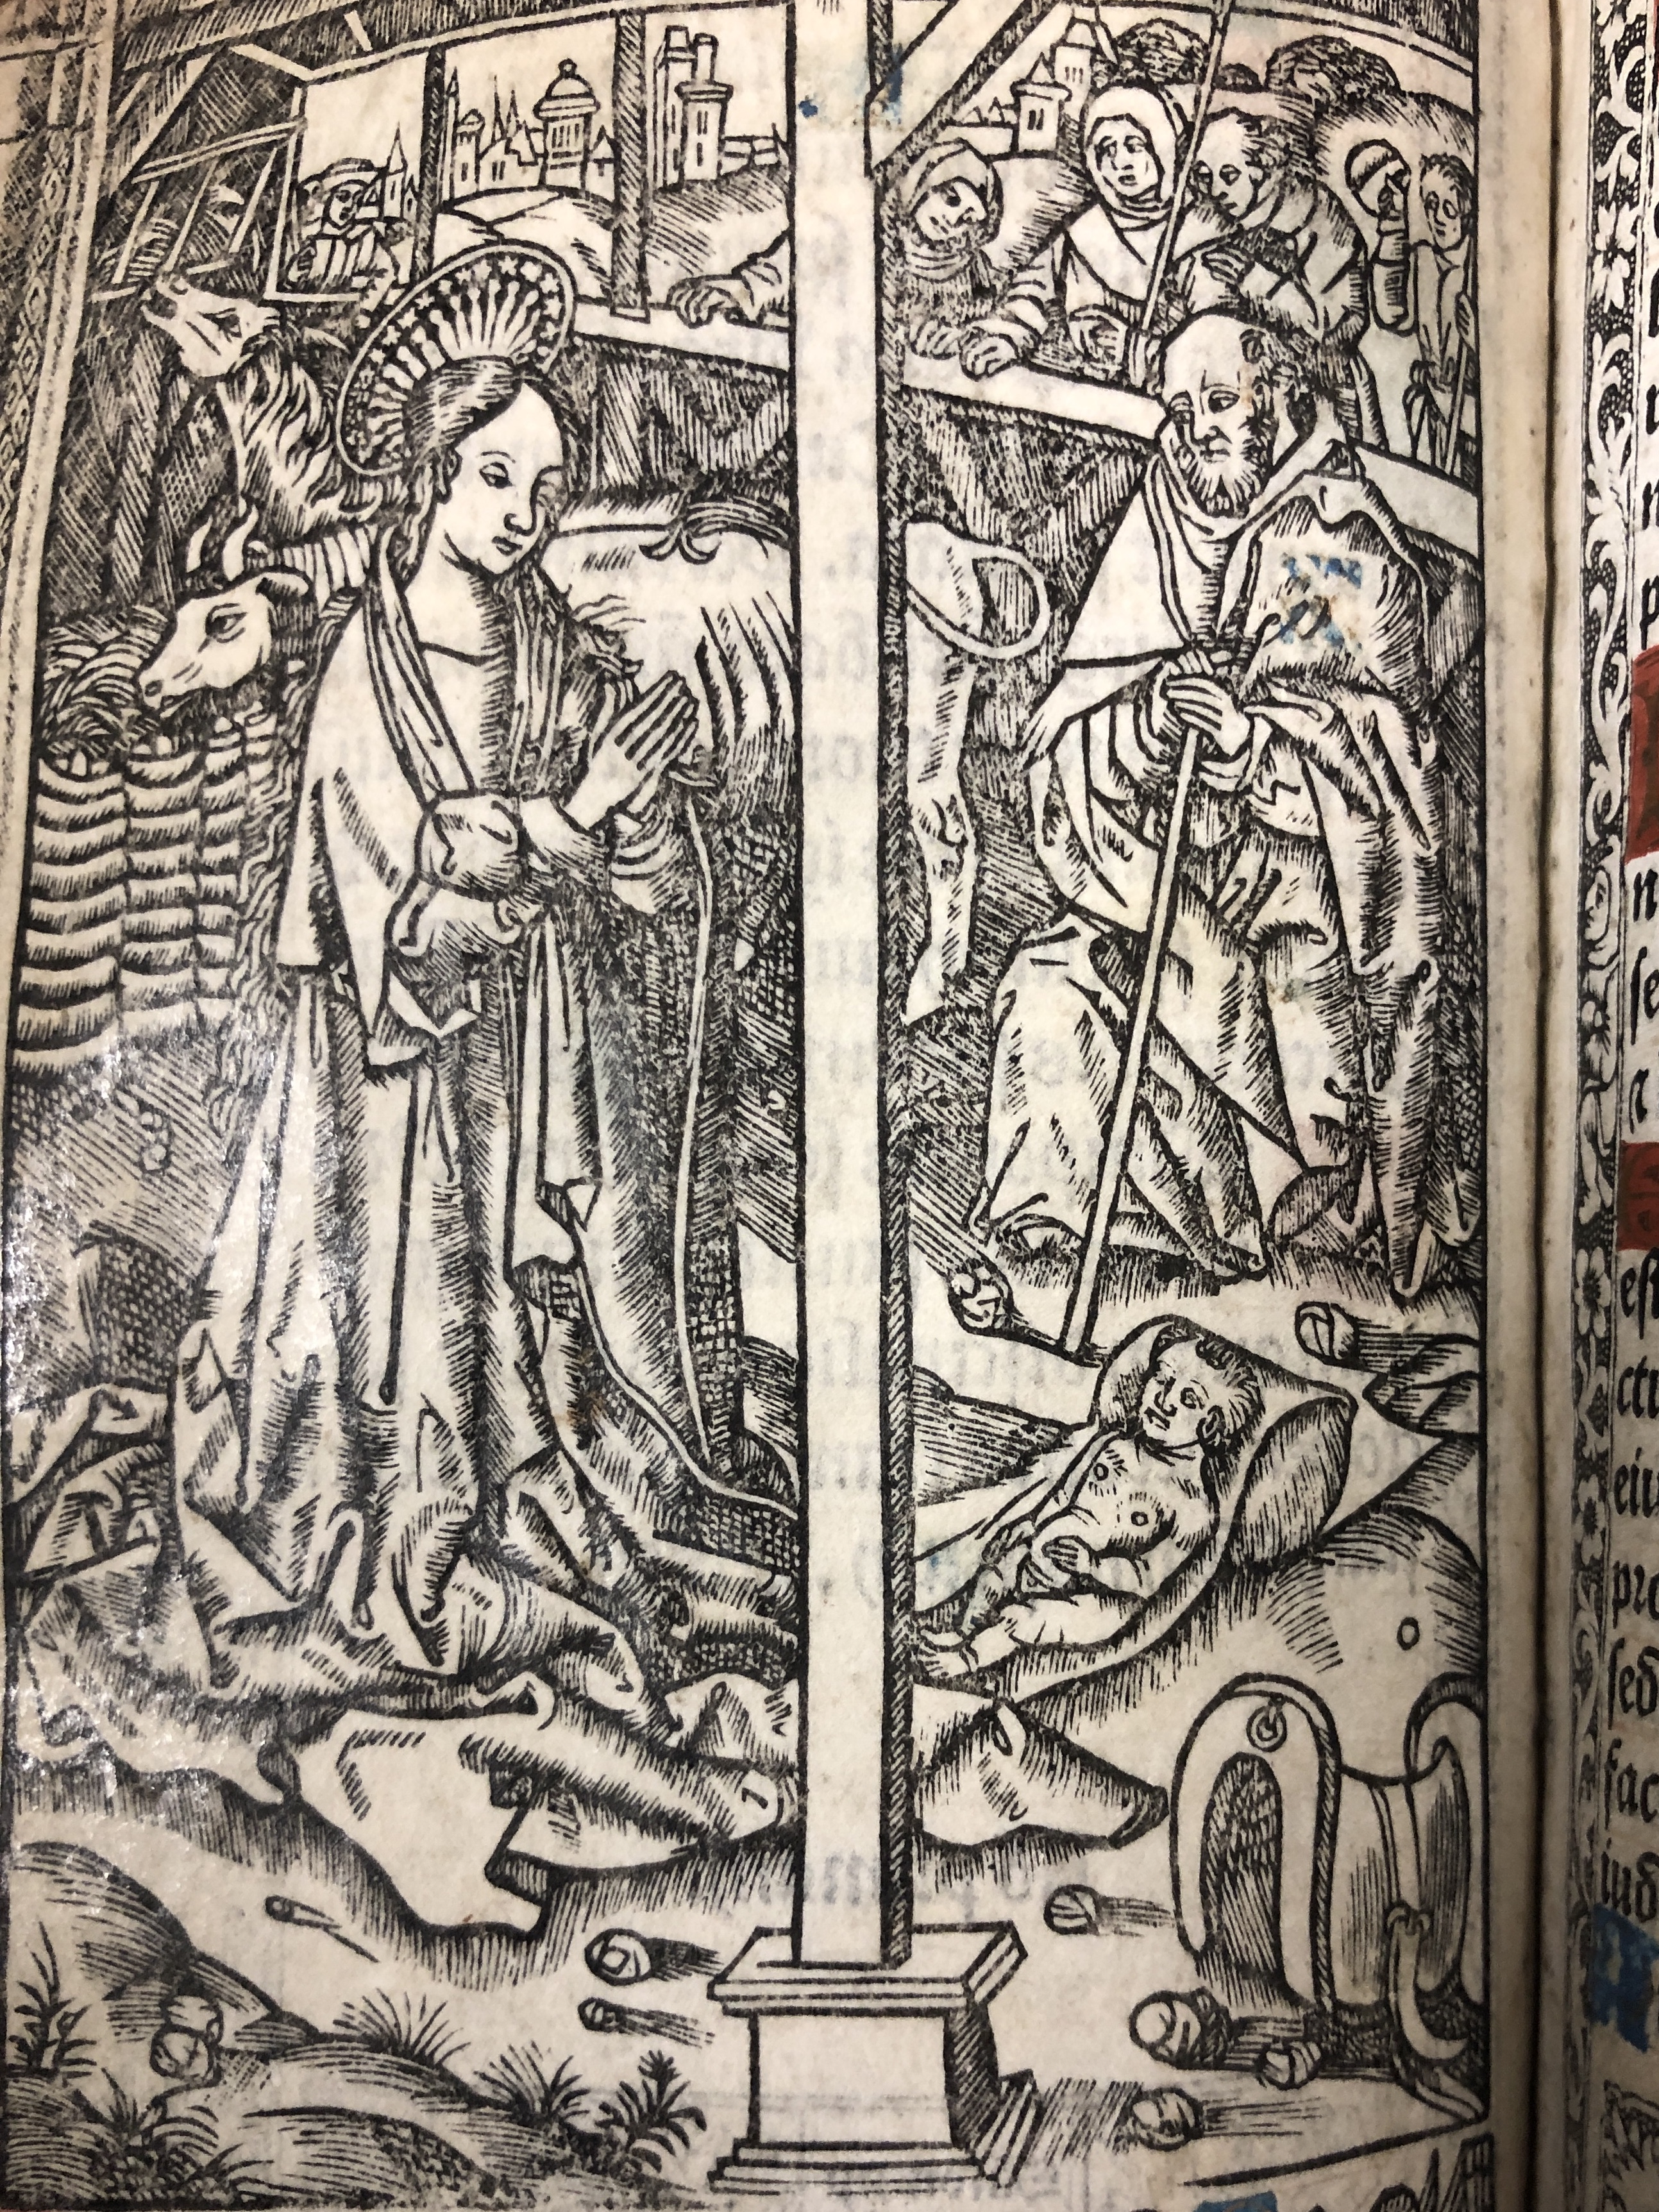 This Nativity image comes from one of the Marian Library’s two printed Books of Hours. Both are nearly identical and feature this bustling Nativity spectacle. Notice the stable post located at the center of the image. The cross-like iconography is illustrative foreshadowing of events to come in the life of Jesus.   